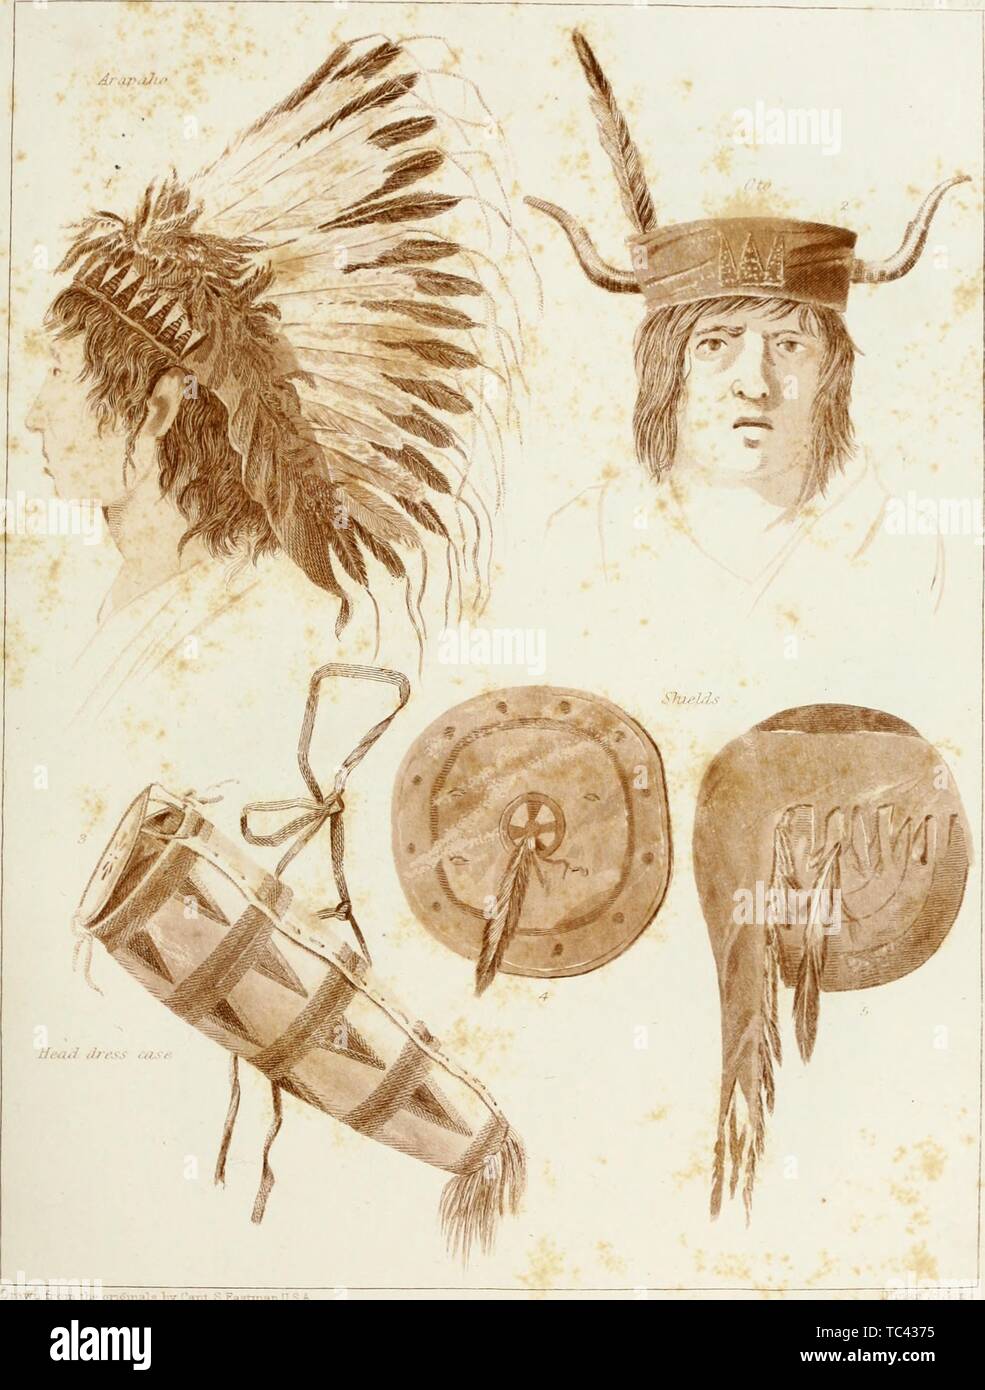 Engravings of Arapaho Indian war bonnets, shields and quiver, from the book 'Archives of Aboriginal knowledge' by Henry Rowe Schoolcraft, 1860. Courtesy Internet Archive. () Stock Photo